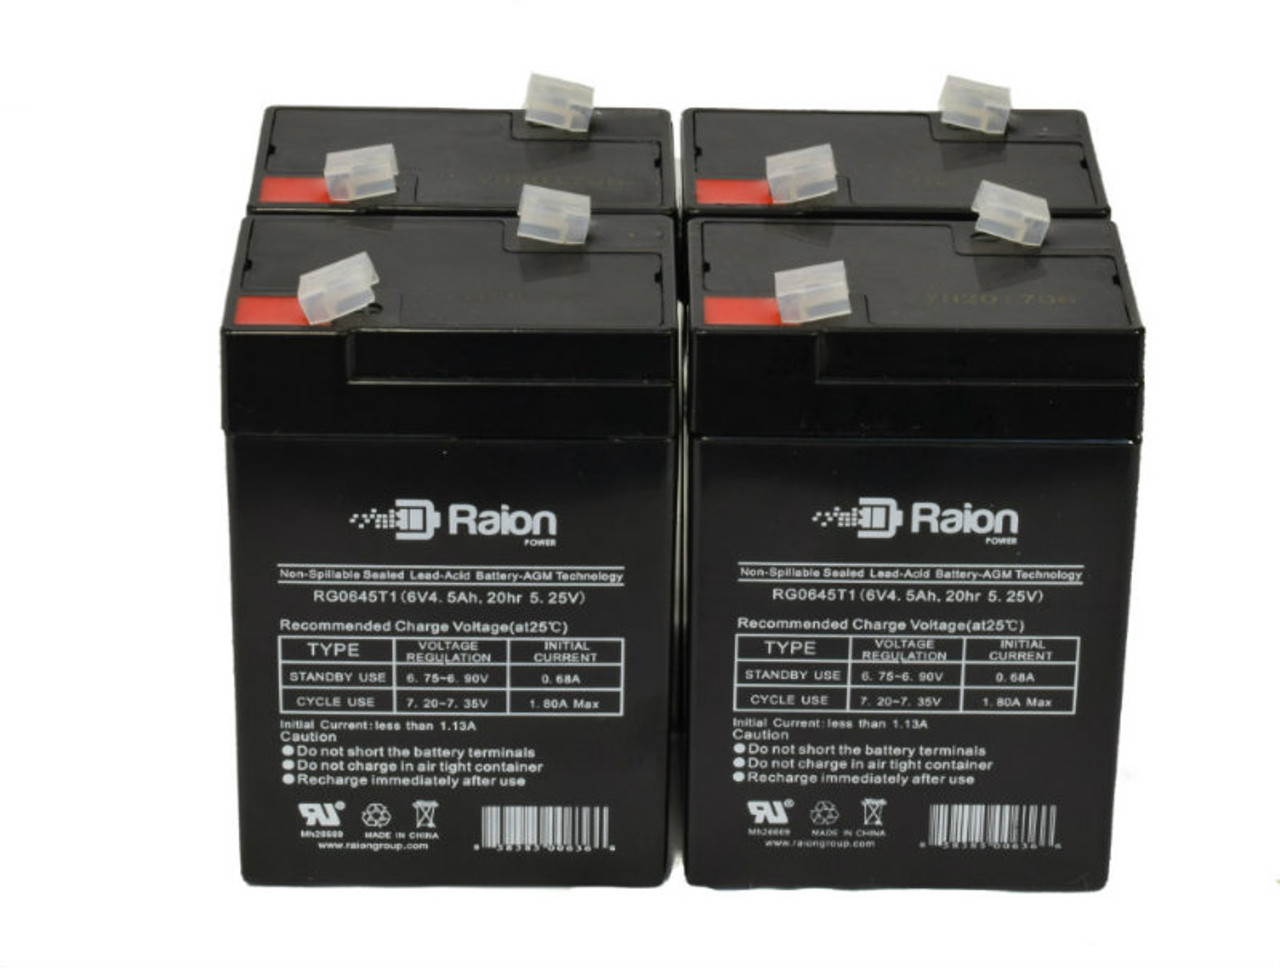 Raion Power 6V 4.5Ah Replacement Emergency Light Battery for Sure-Lites 2678 - 4 Pack